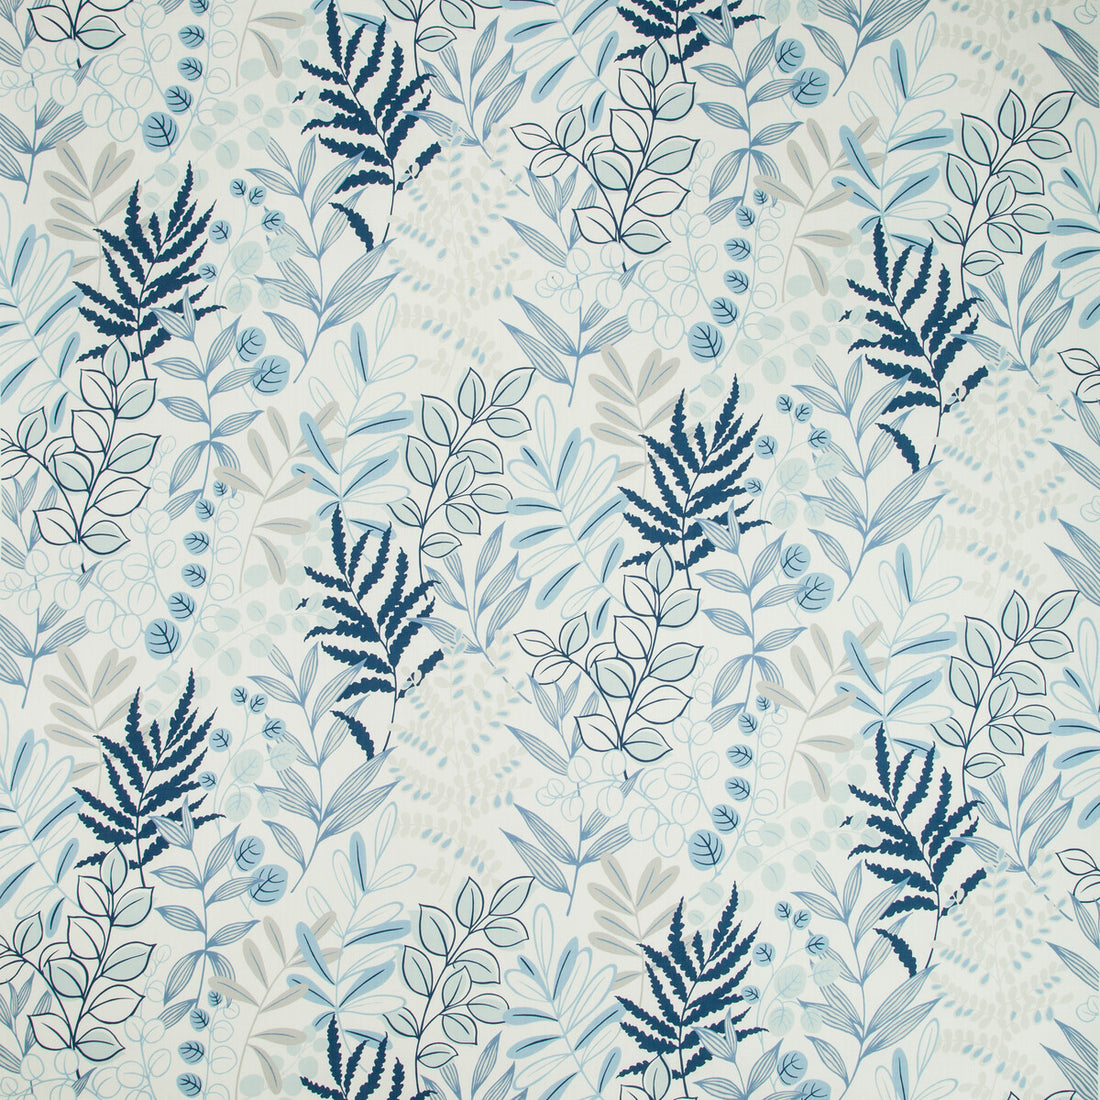 Ferngarden fabric in artic color - pattern FERNGARDEN.15.0 - by Kravet Basics in the Bermuda collection